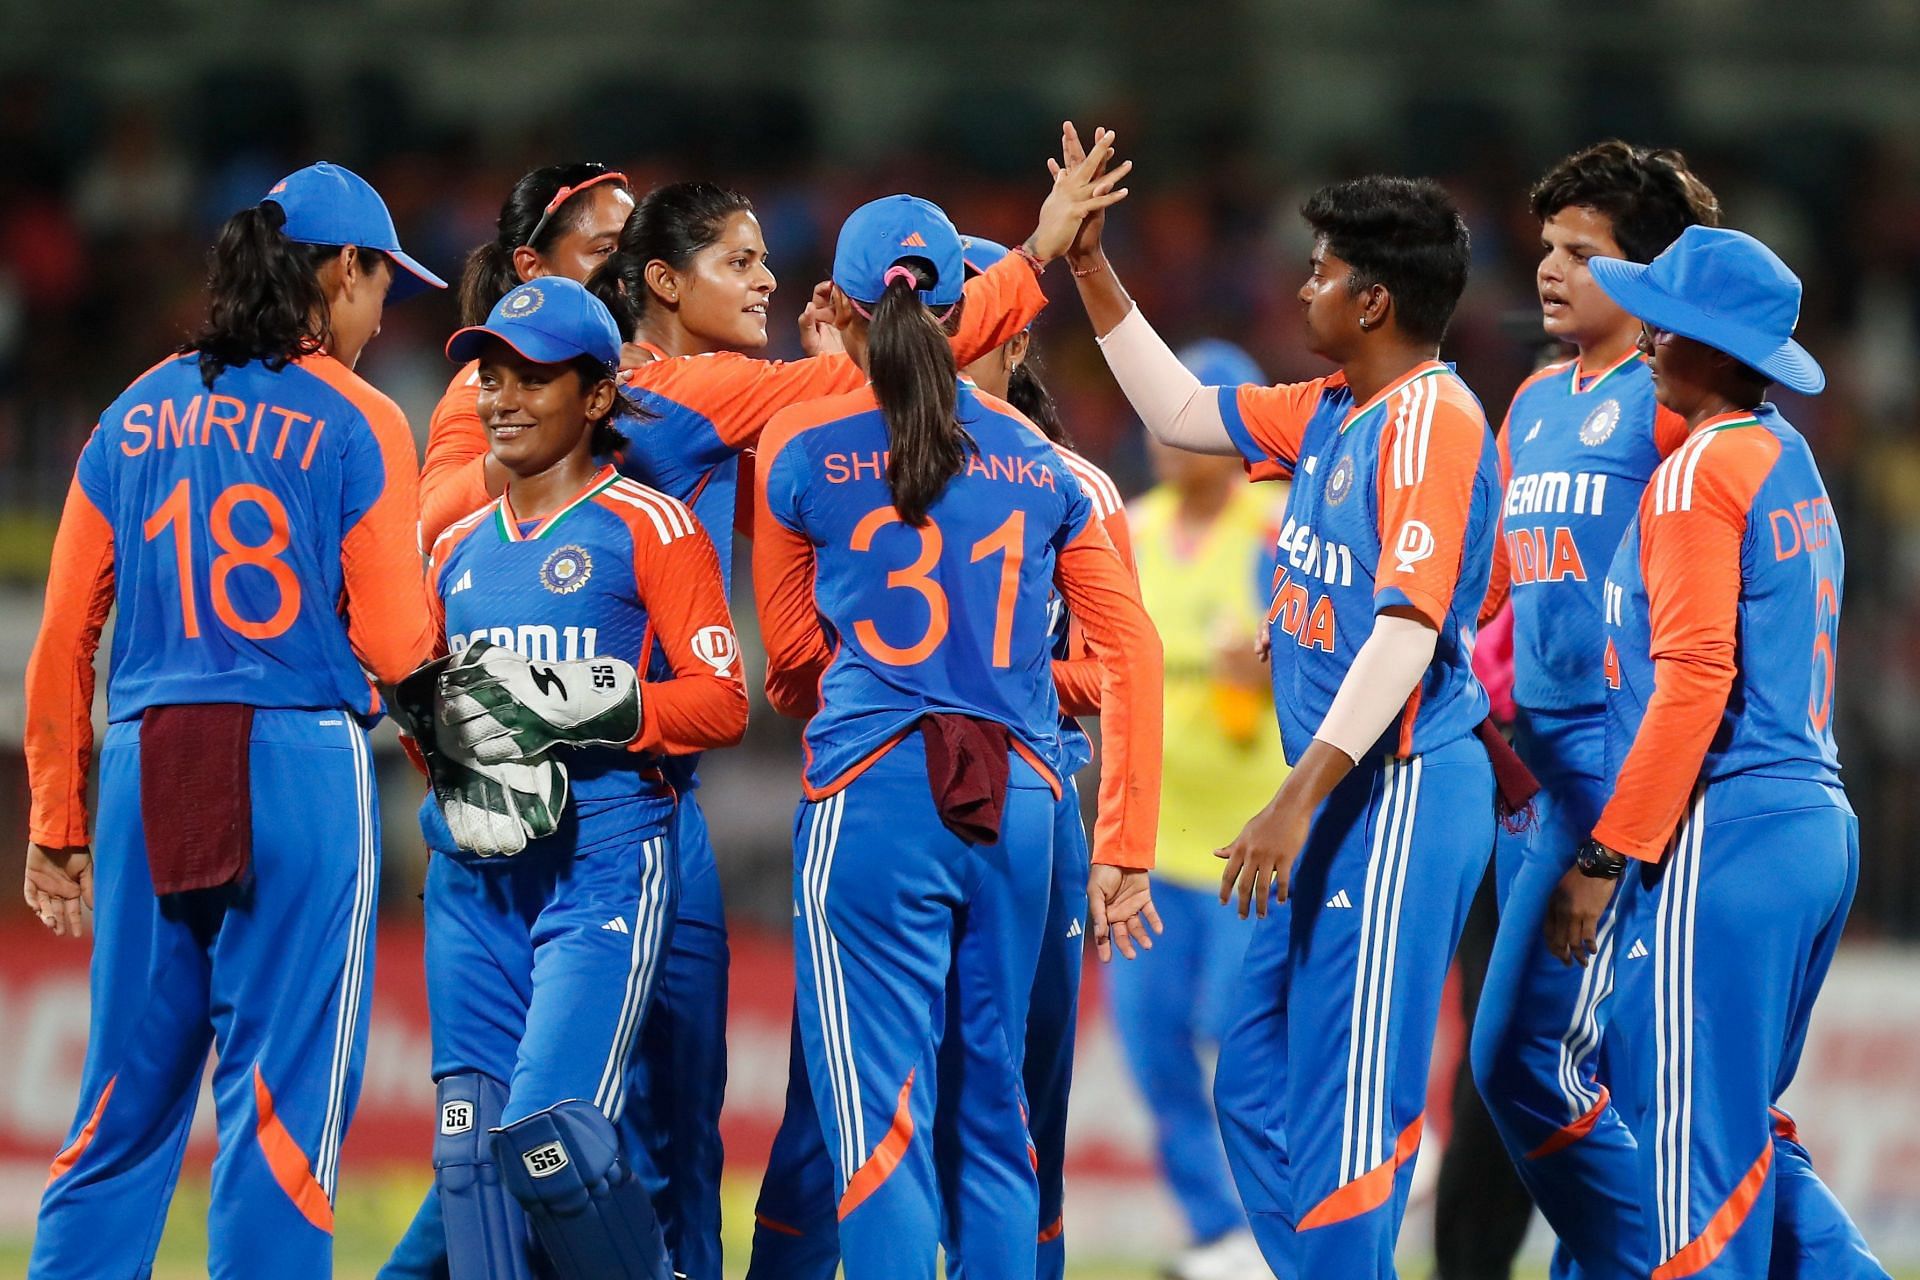 India Women vs South Africa Women, 3rd T20I: Probable XIs, Match Prediction, Pitch Report, Weather Forecast, and Live Streaming Details